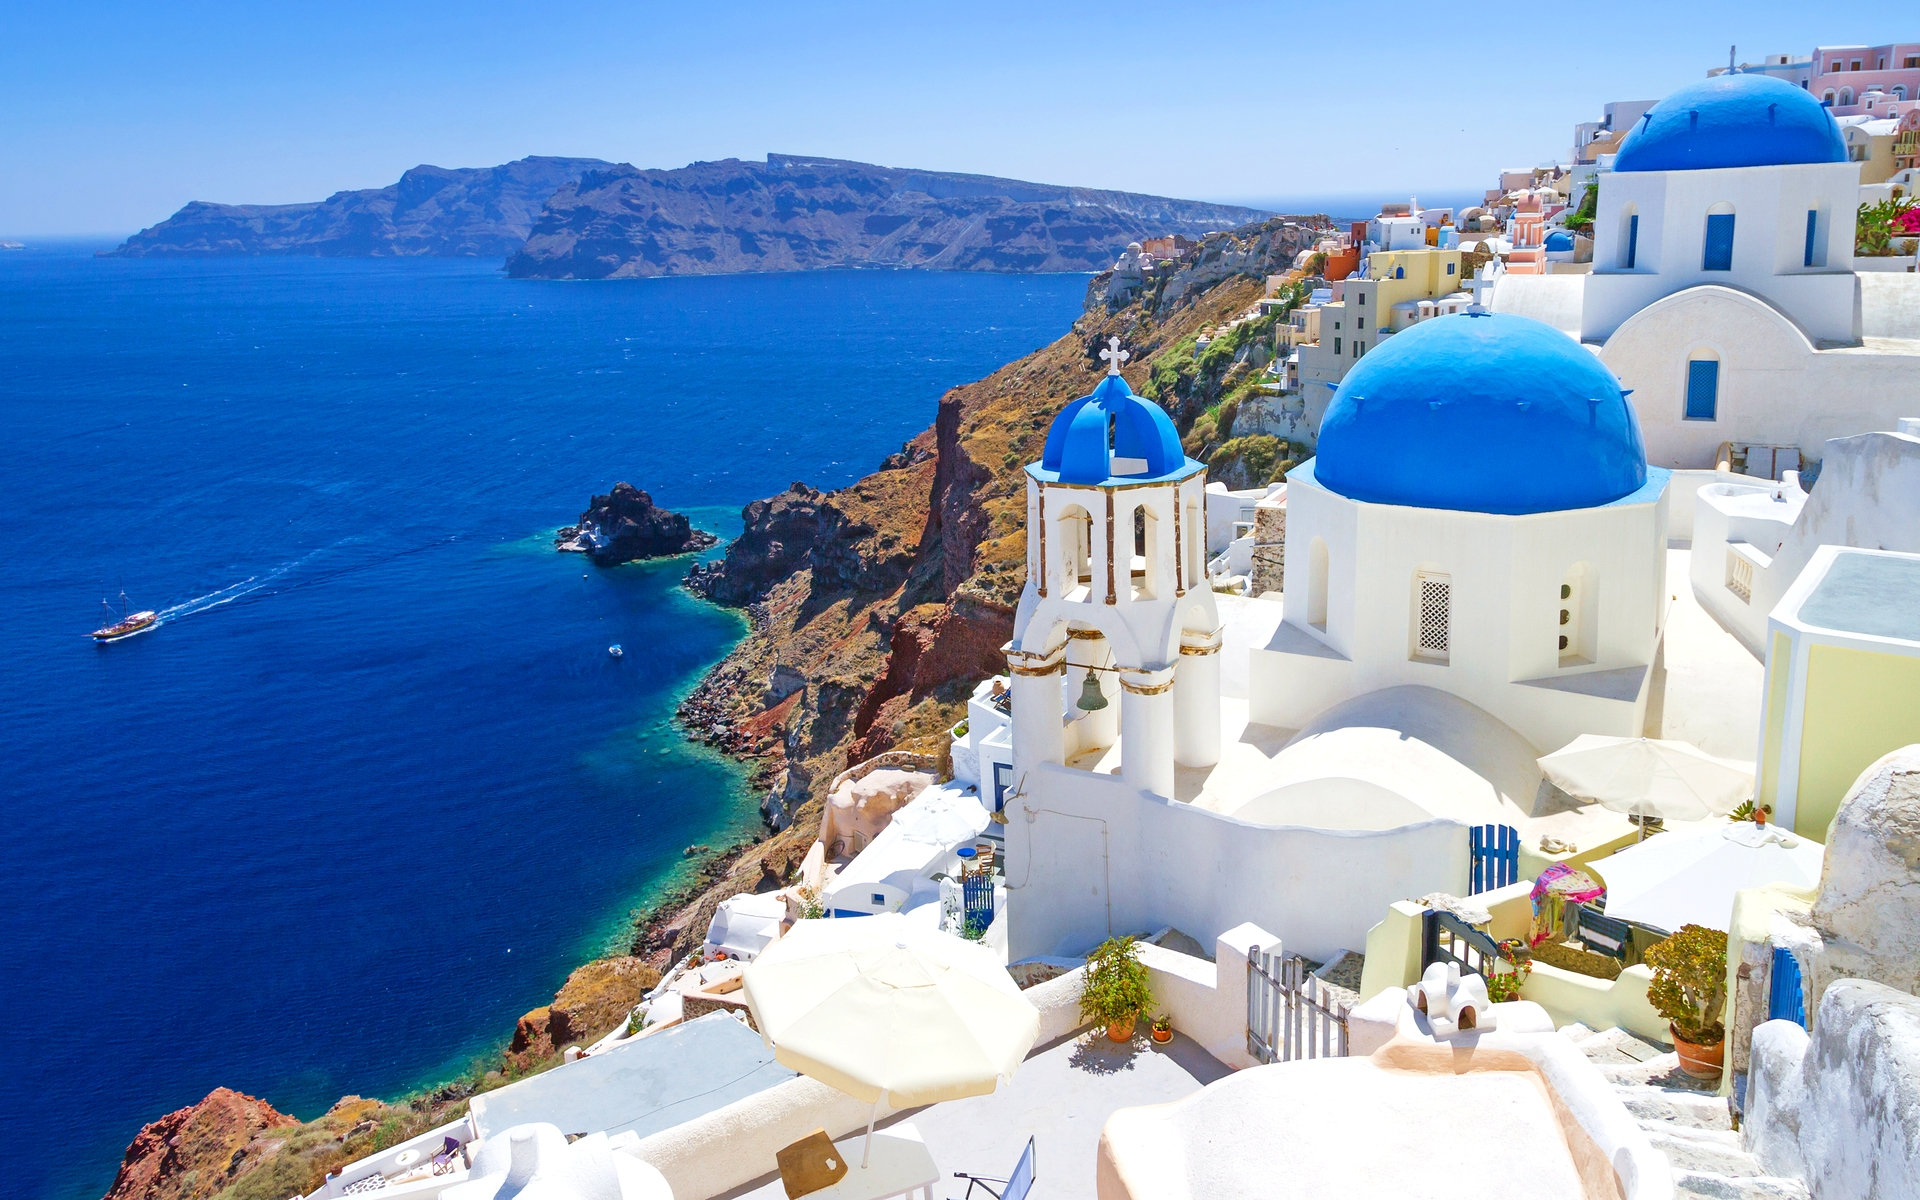 Santorini, the one and only